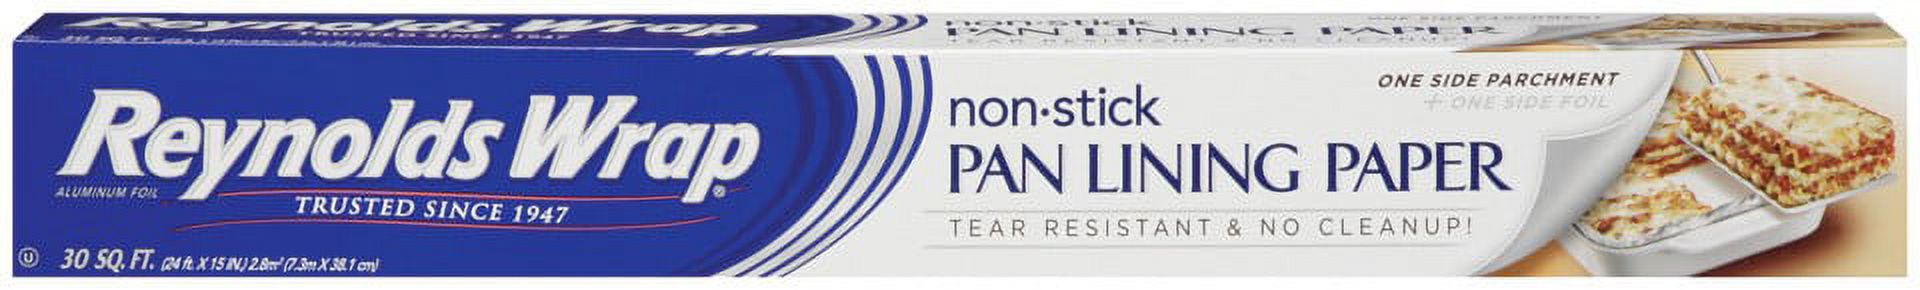 Reynolds Non-Stick Pan Lining Paper, 30 sq ft - image 1 of 2